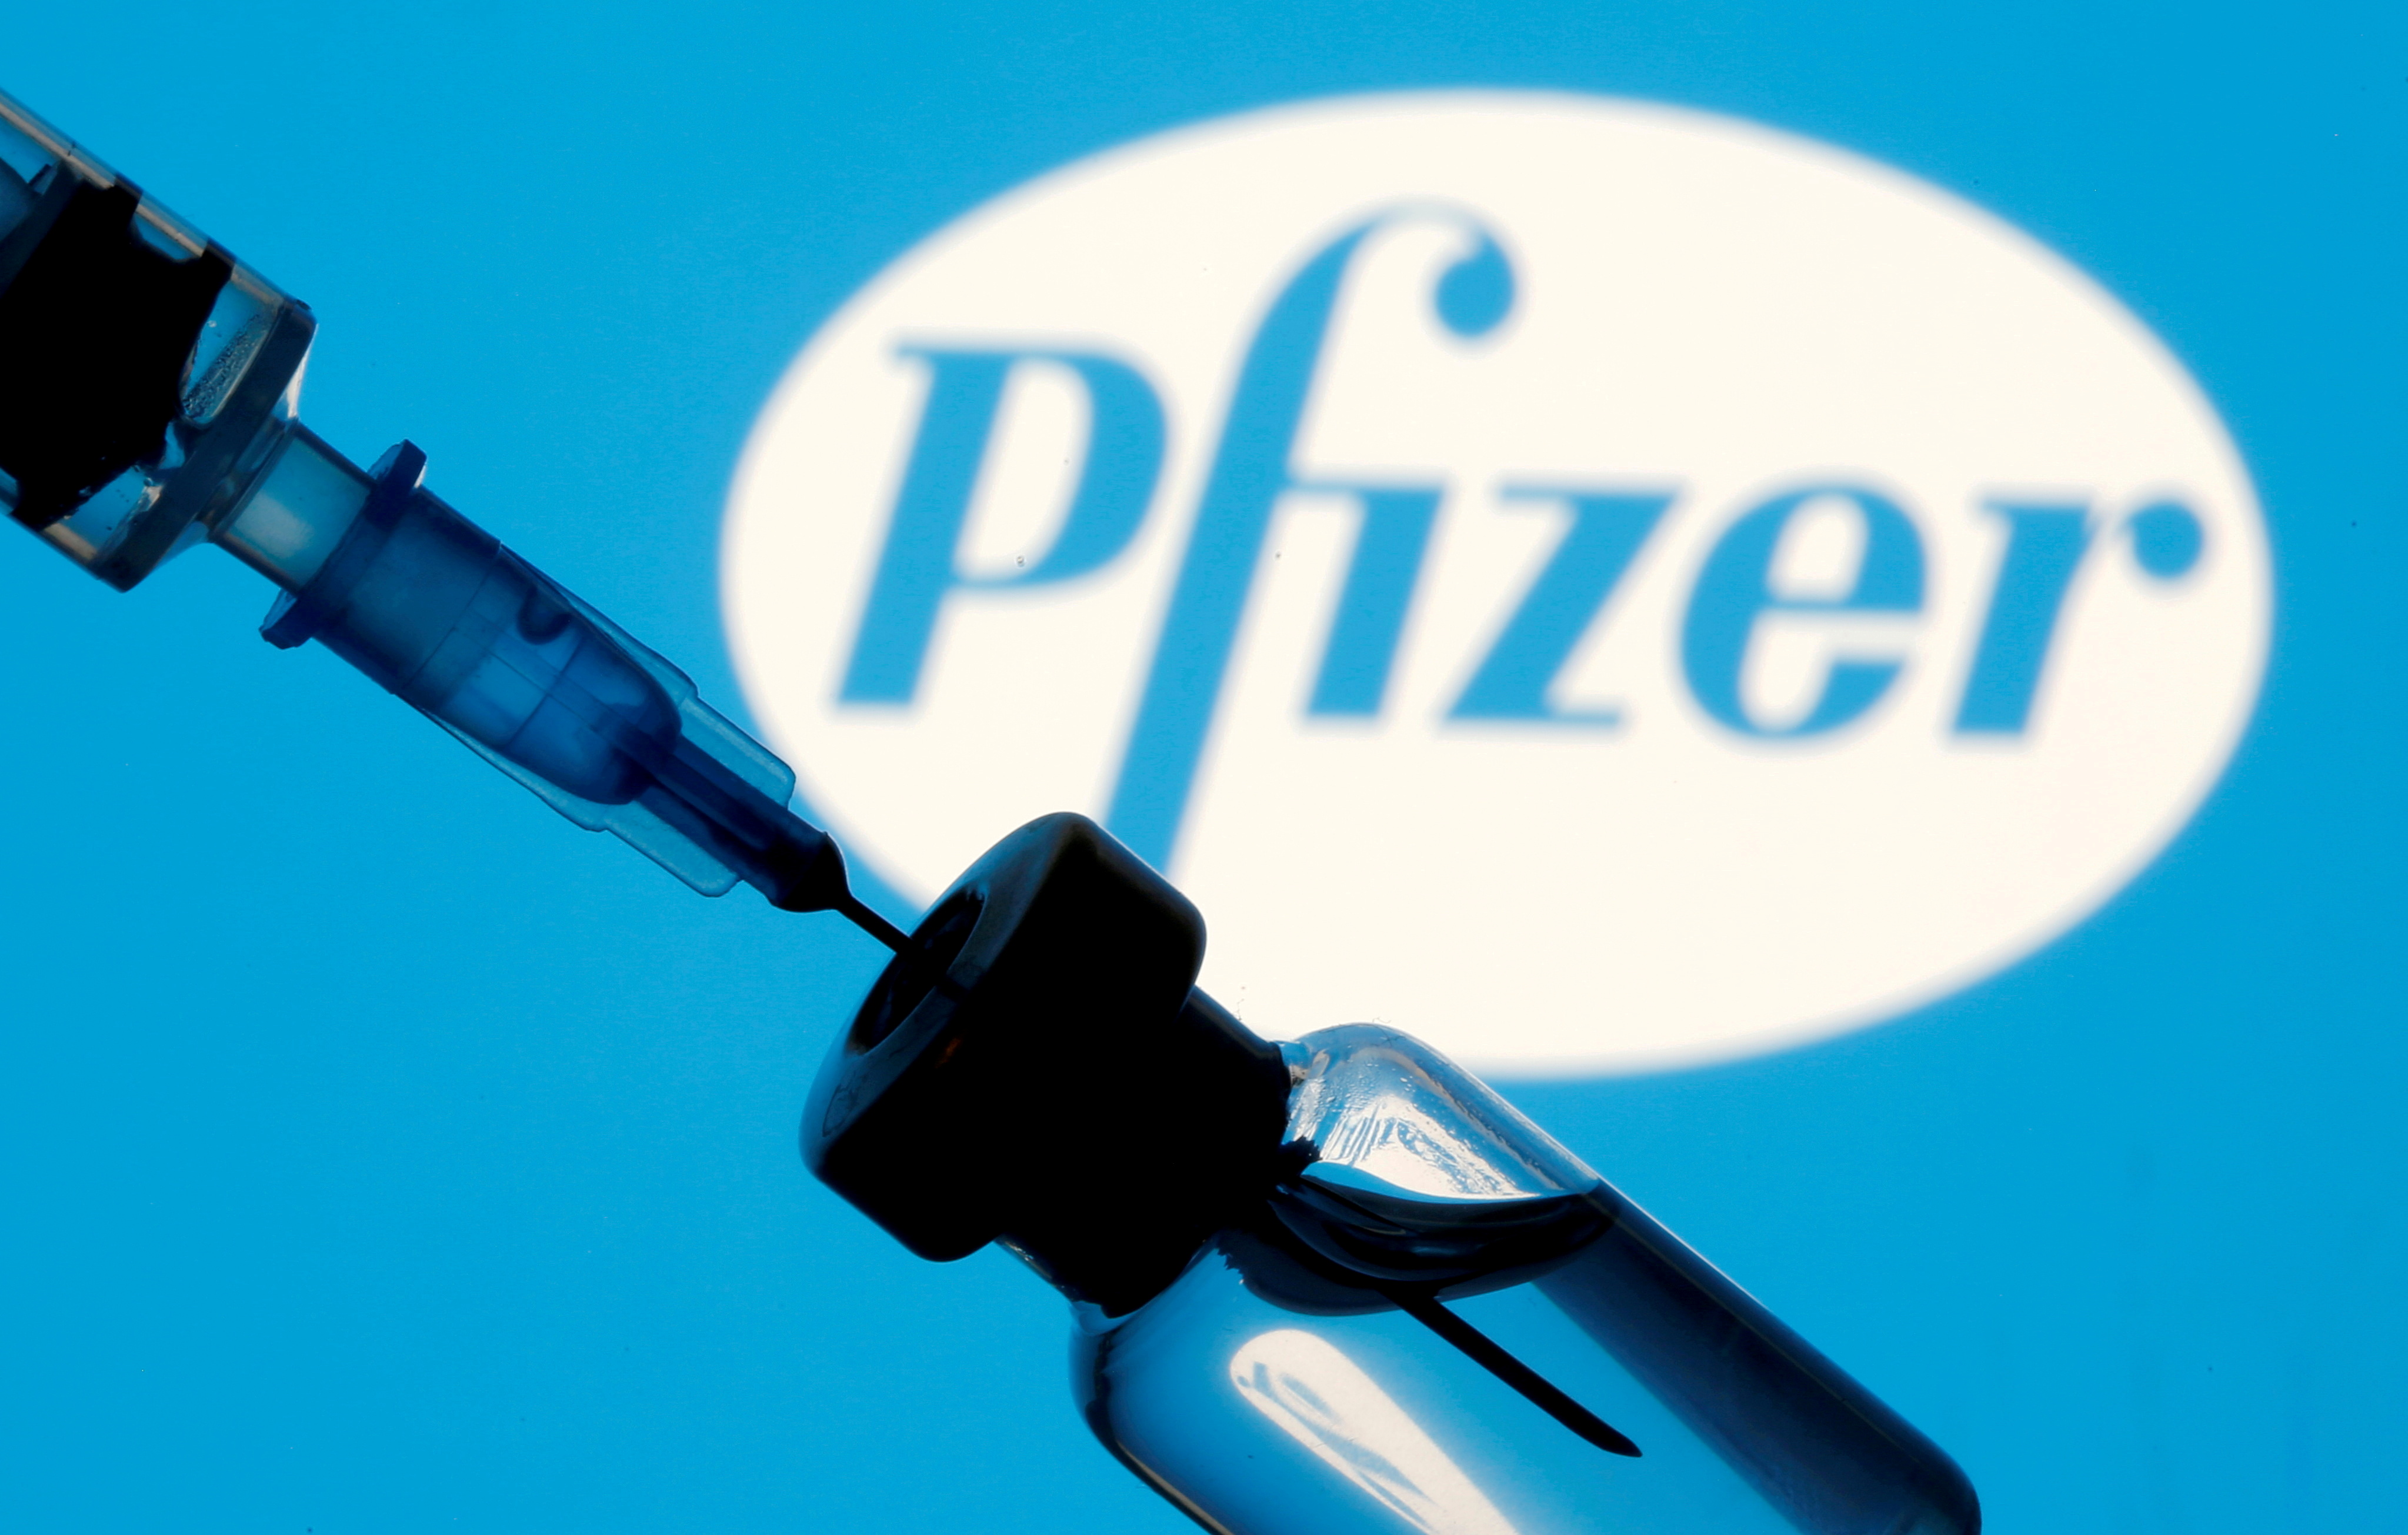 FILE PHOTO: A vial and sryinge are seen in front of a displayed Pfizer logo in this illustration taken January 11, 2021. REUTERS/Dado Ruvic/Illustration/File Photo